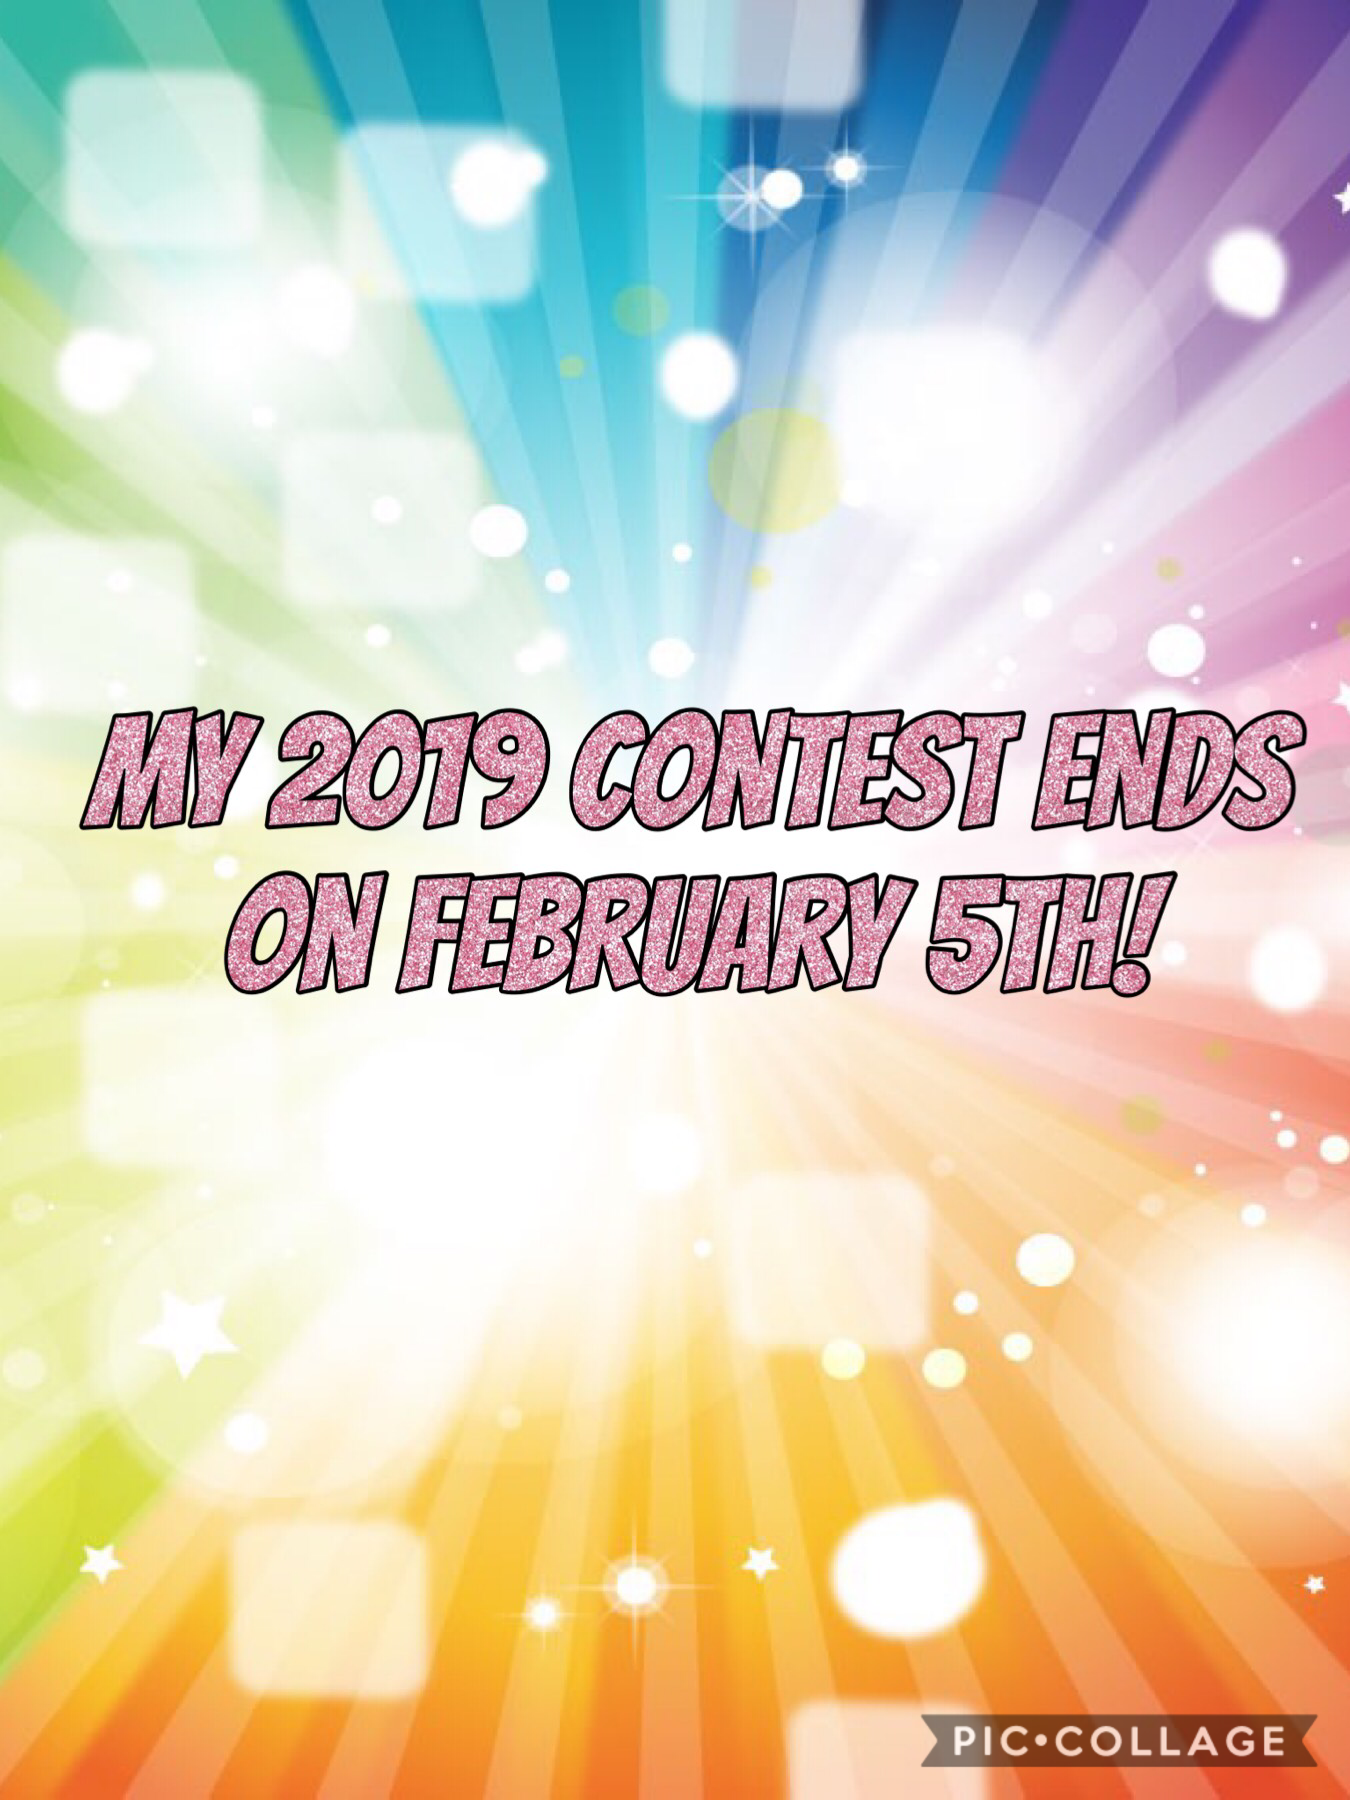 Contest ends on February 5th!